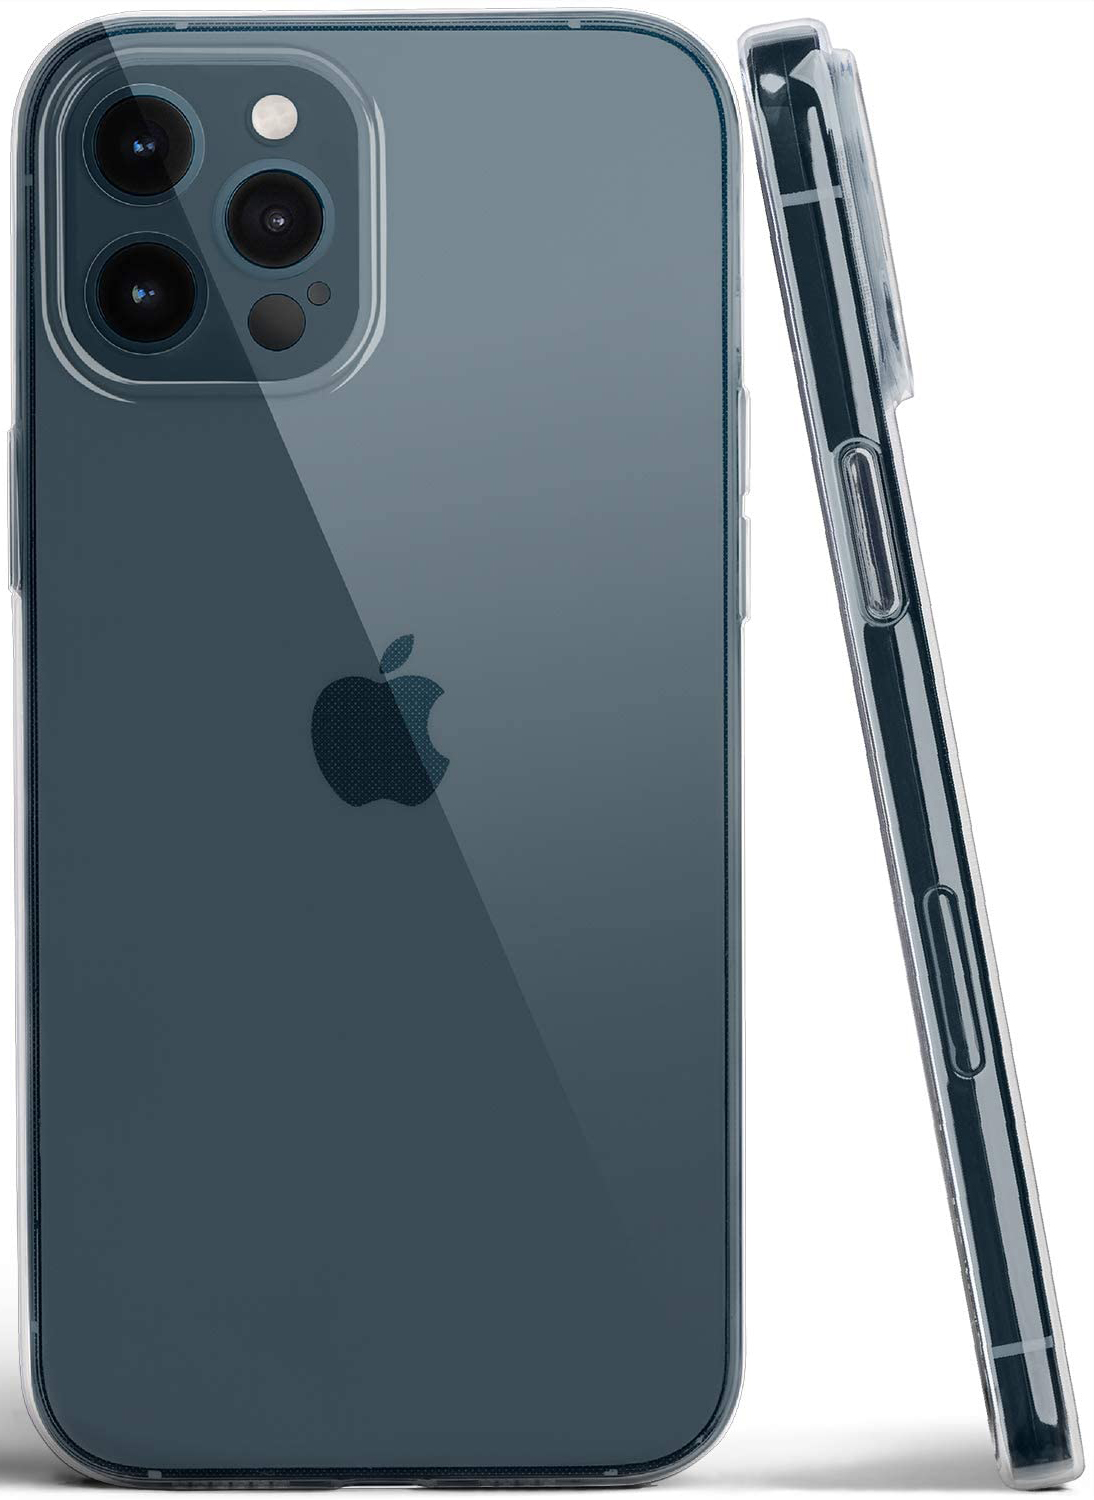 Totallee Clear Iphone 12 Pro Max Case